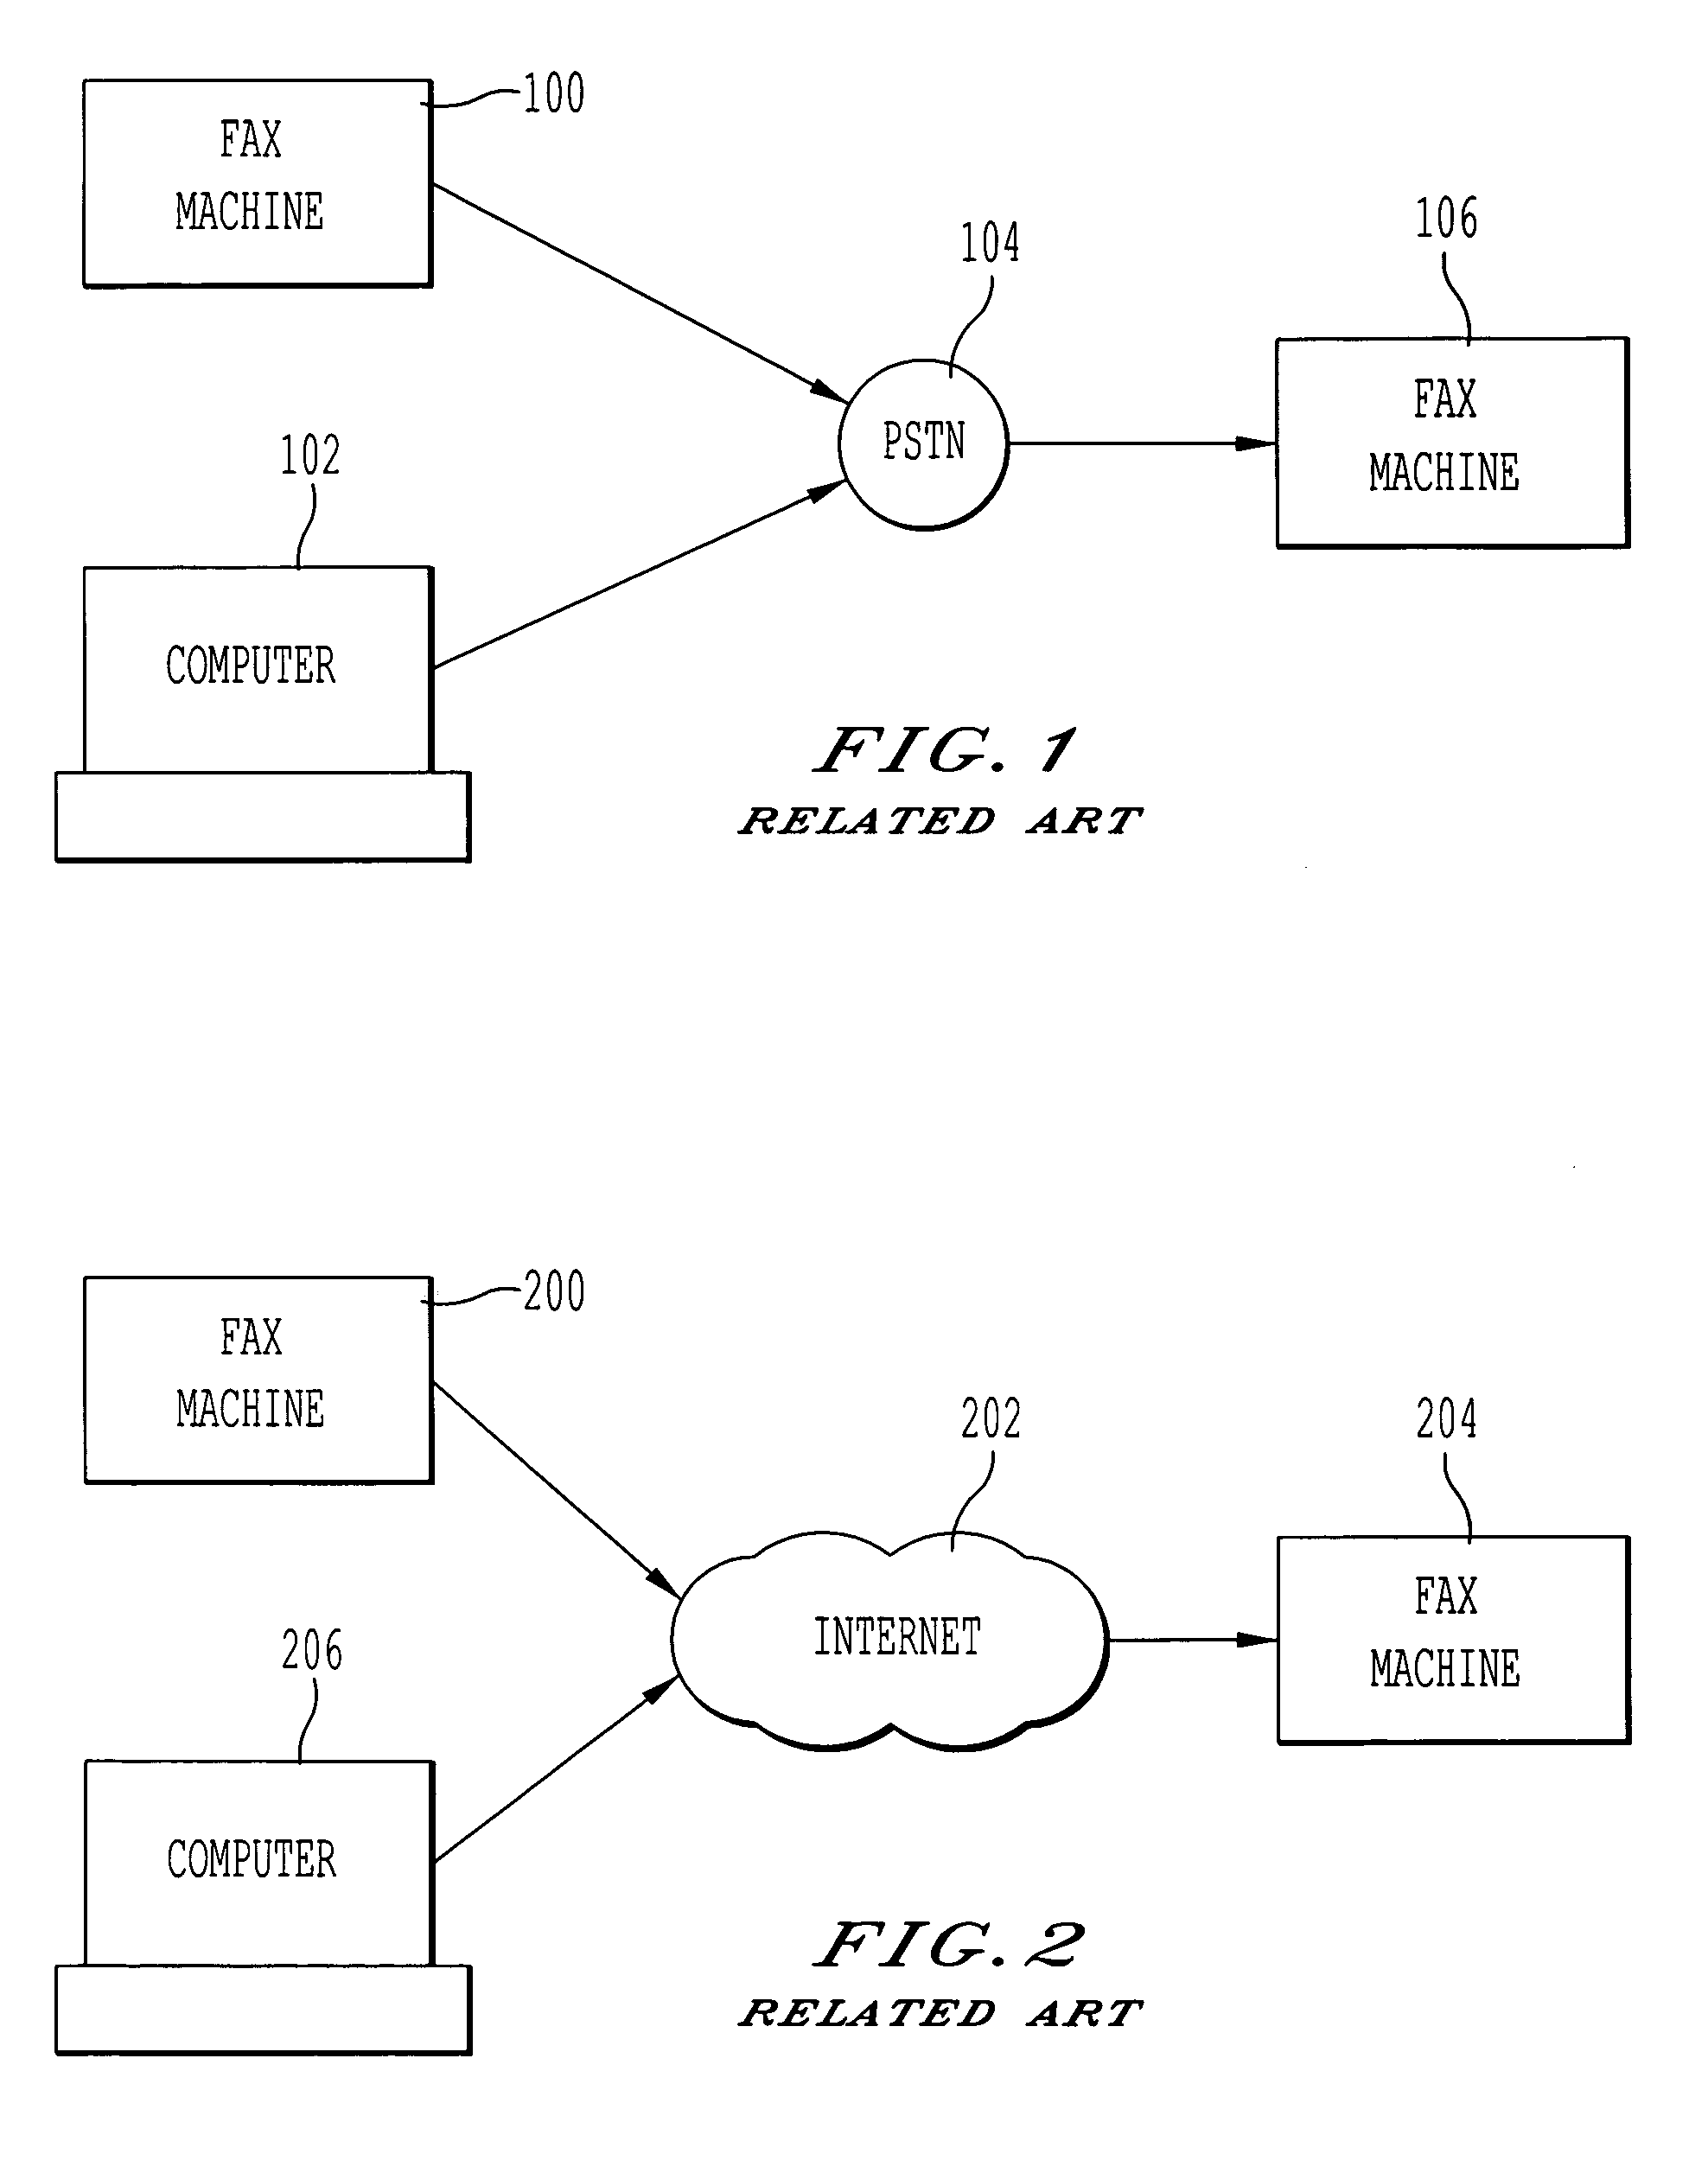 Method and system for transmitting a facsimile from a computer to a remote fax machine using an internet fax machine as transfer station